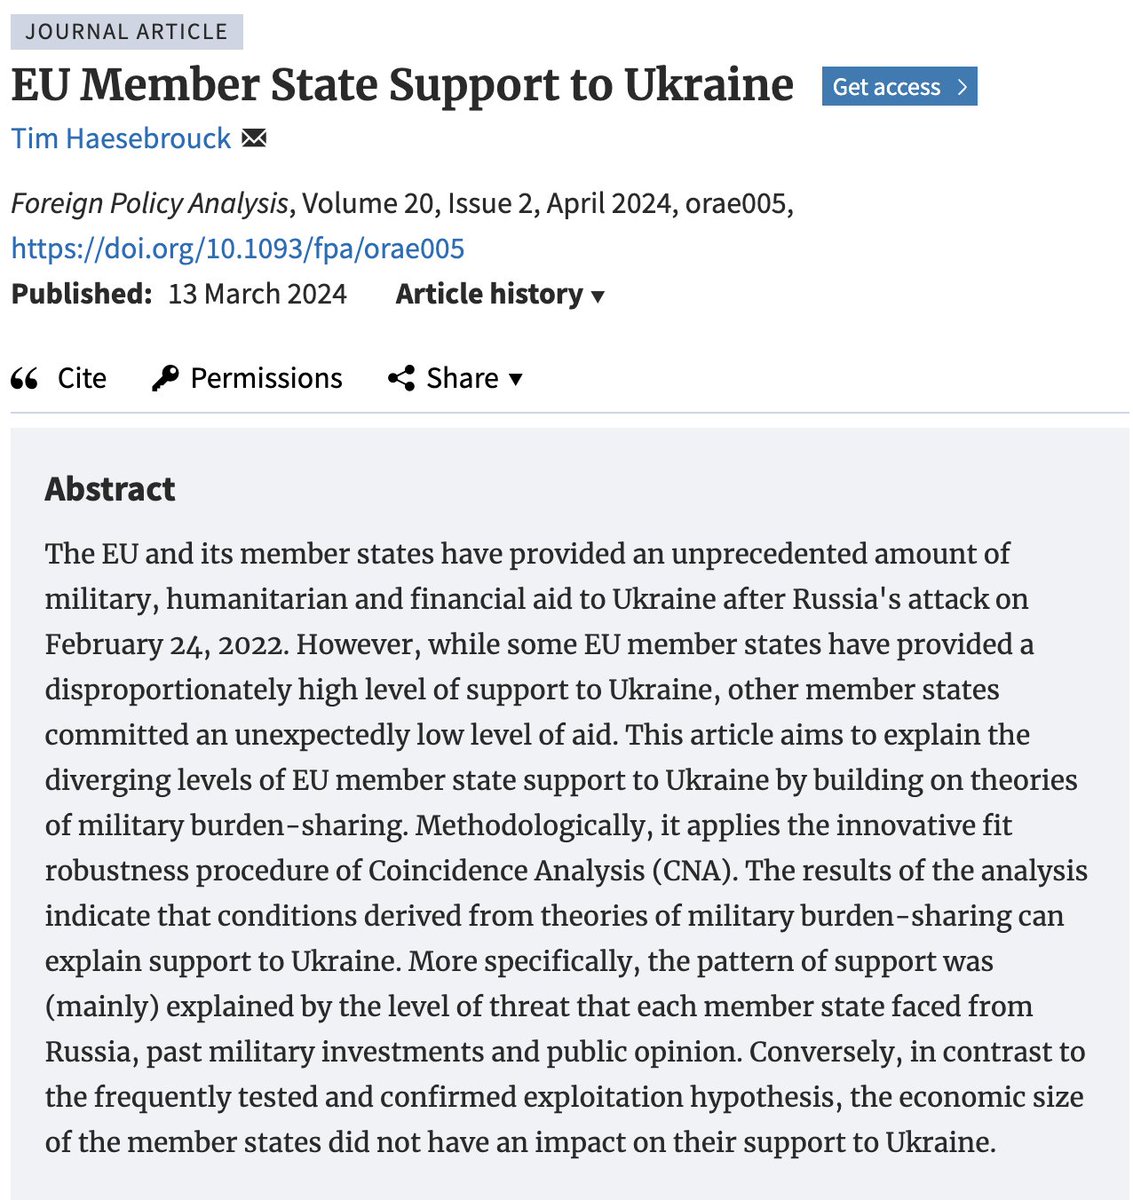 In his new and timely research note 'EU Member State Support to Ukraine' Tim Haesebrouck aims to explain the diverging levels of EU member state support to Ukraine through building on theories of military burden-sharing #Ukraine #Aid #EU academic.oup.com/fpa/article-ab…